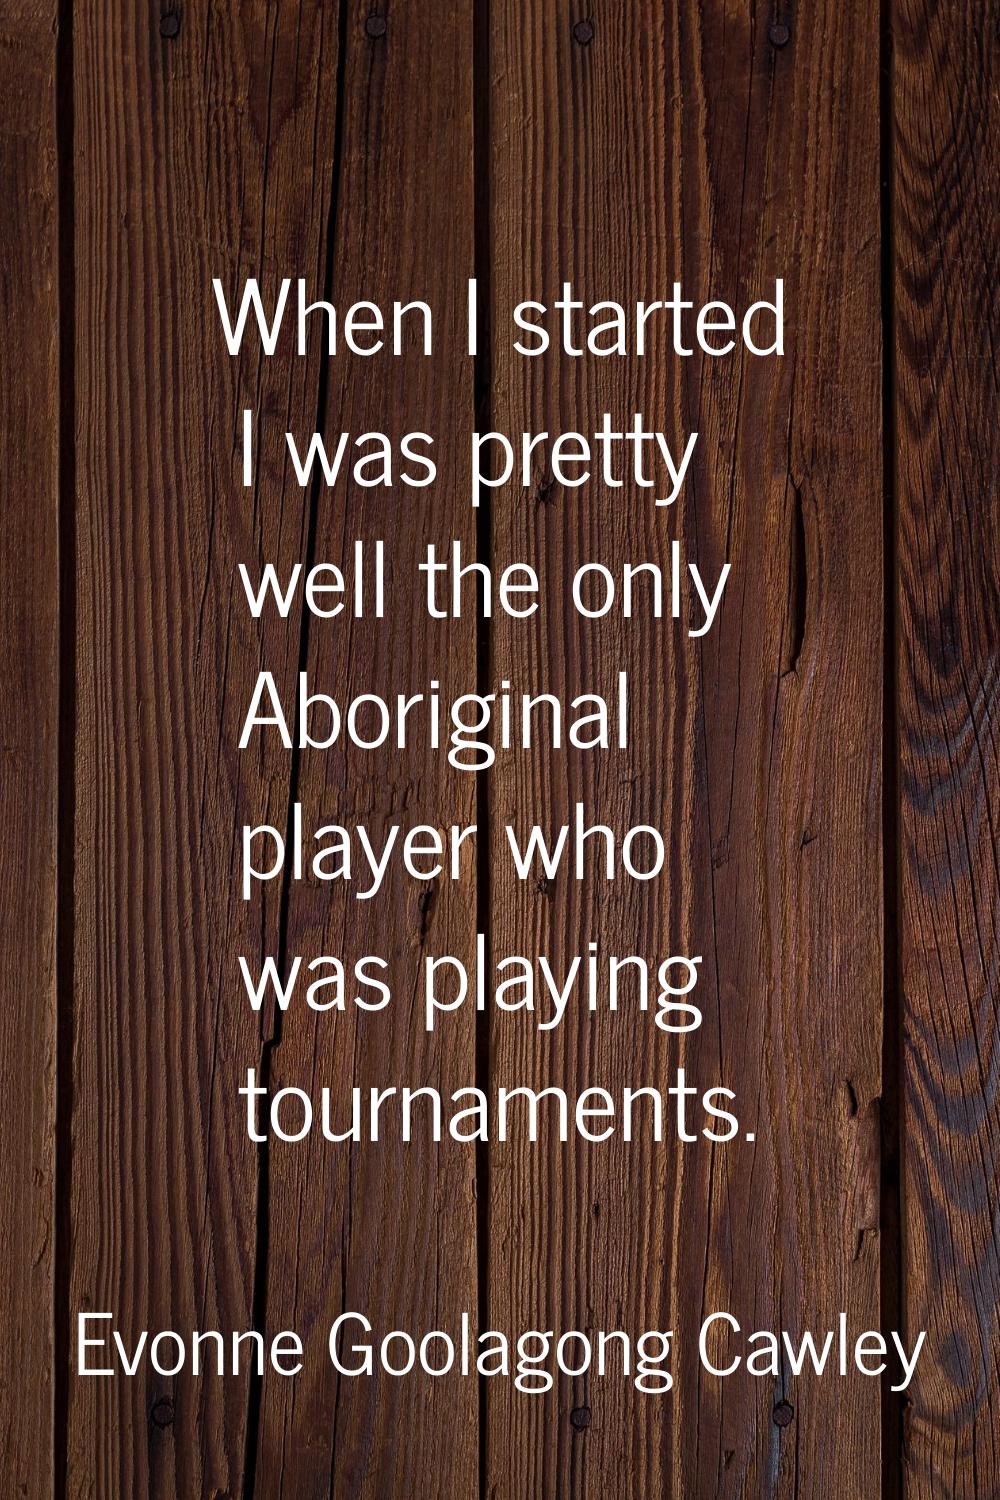 When I started I was pretty well the only Aboriginal player who was playing tournaments.